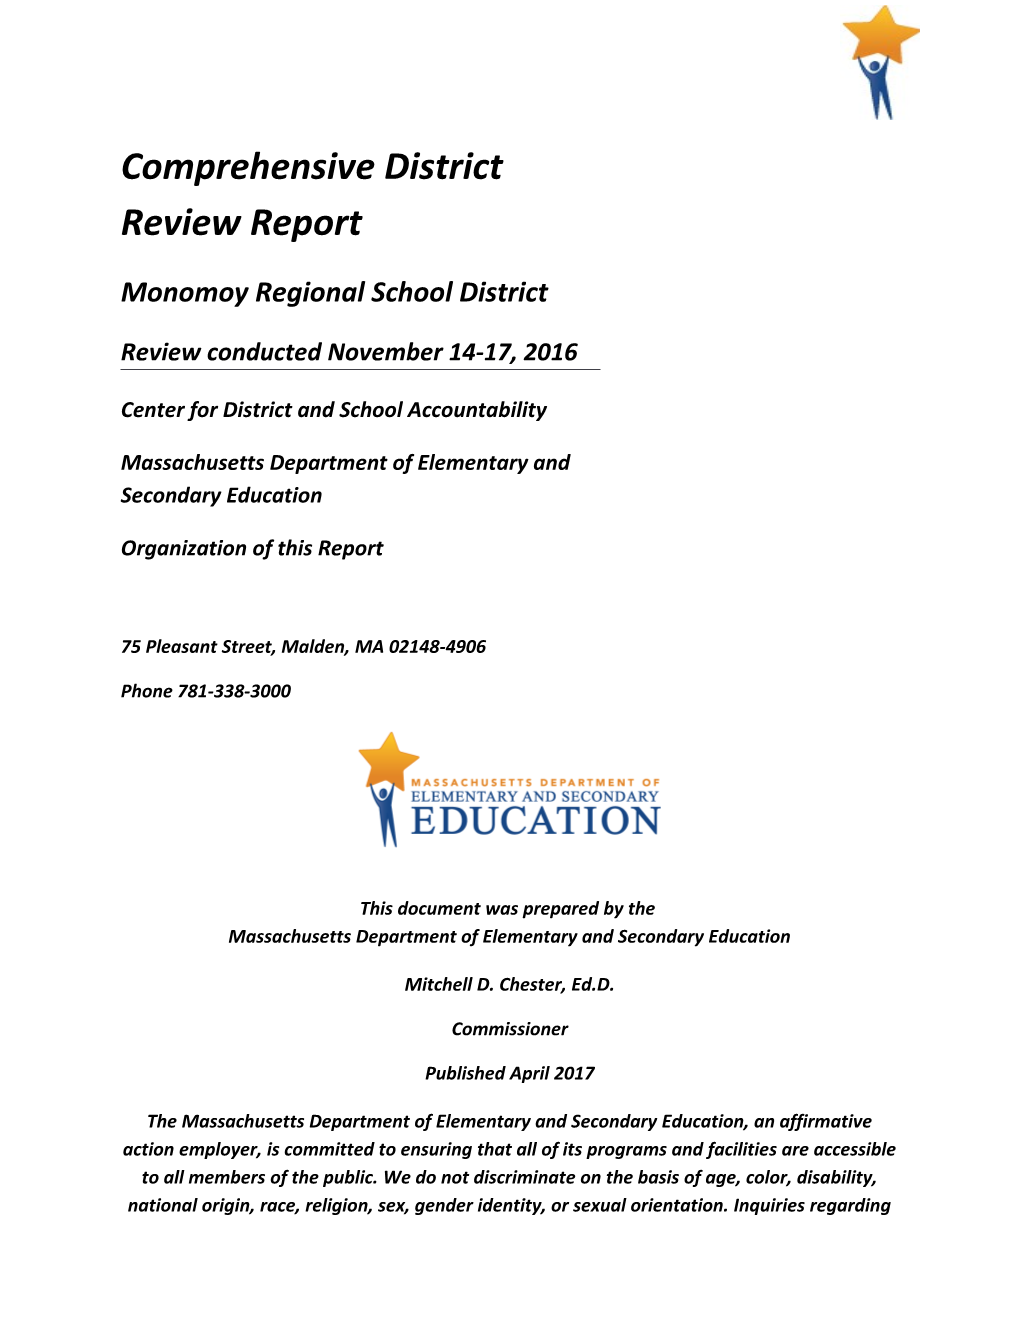 Monomoy District Review Report, 2016 Onsite